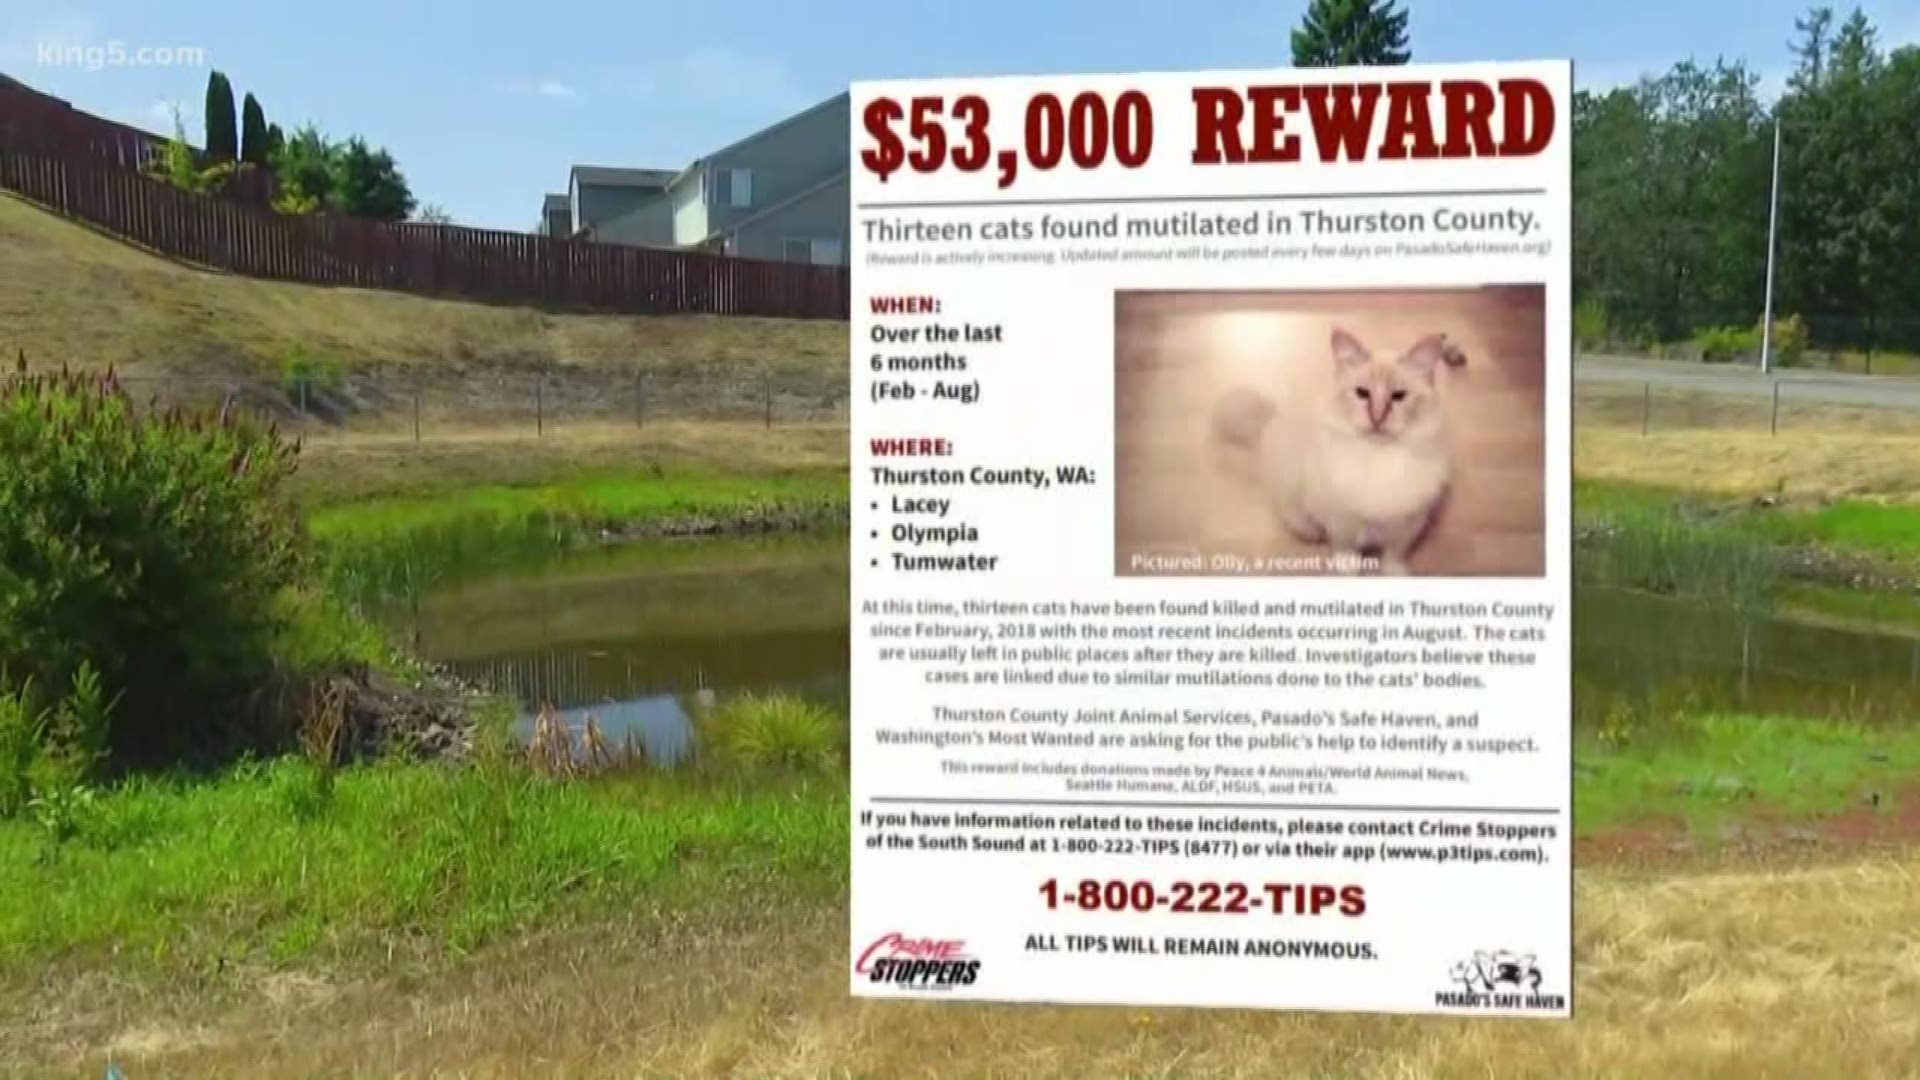 A cat was found dead in Thurston County with part of a 2018 missing cat flier attached. KING 5's Kalie Greenberg reports.